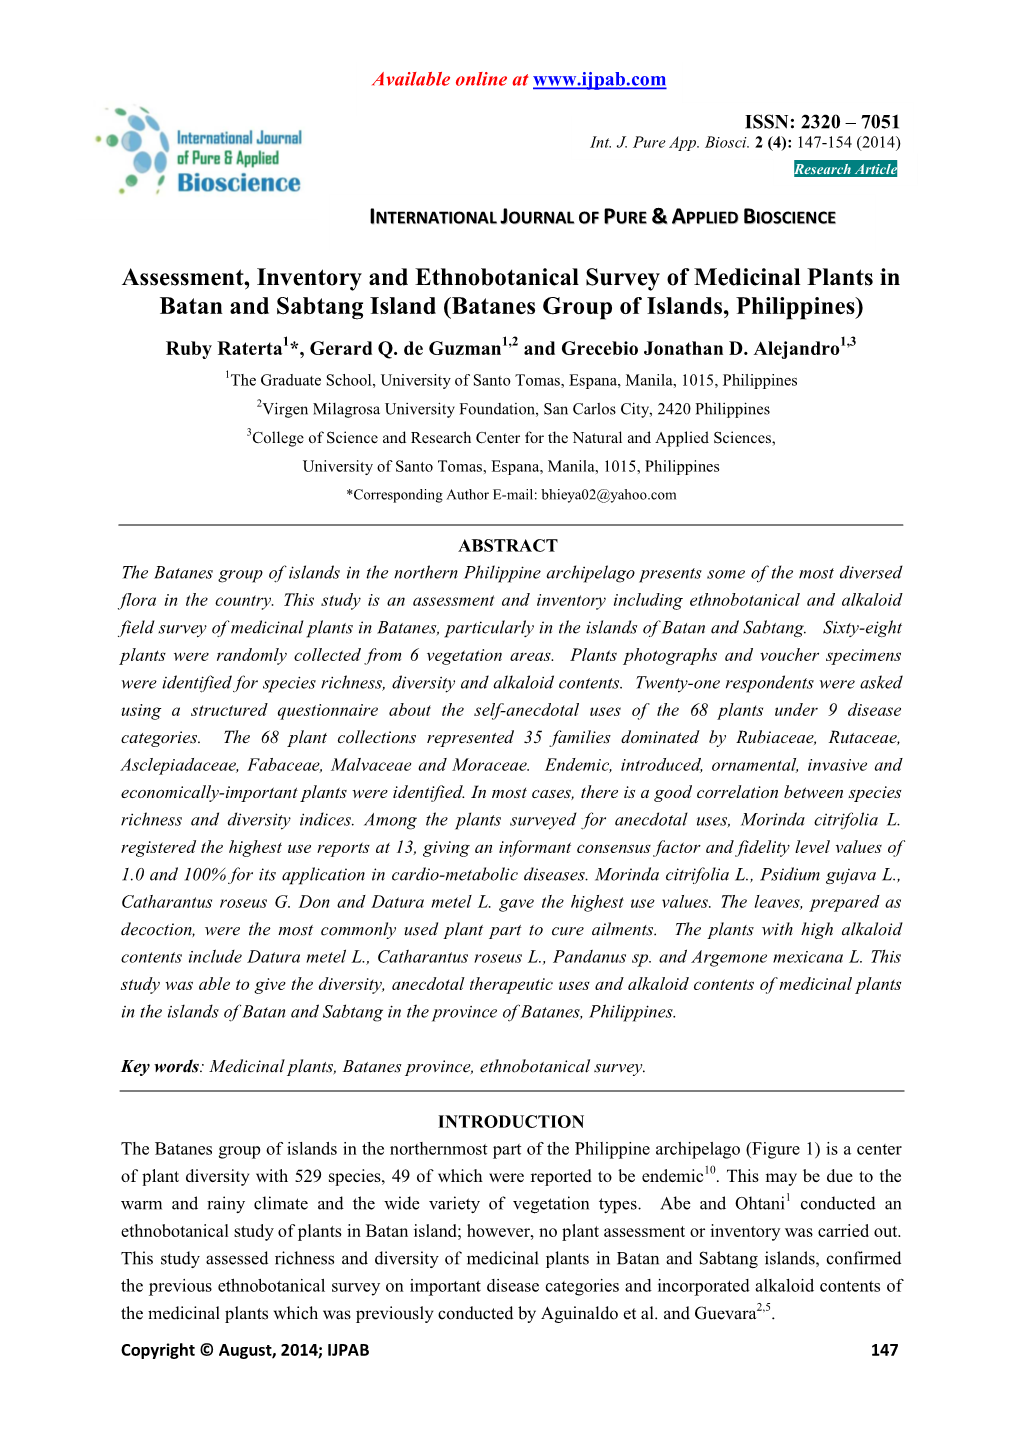 Assessment, Inventory and Ethnobotanical Survey of Medicinal Plants in Batan and Sabtang Island (Batanes Group of Islands, Philippines) Ruby Raterta 1*, Gerard Q